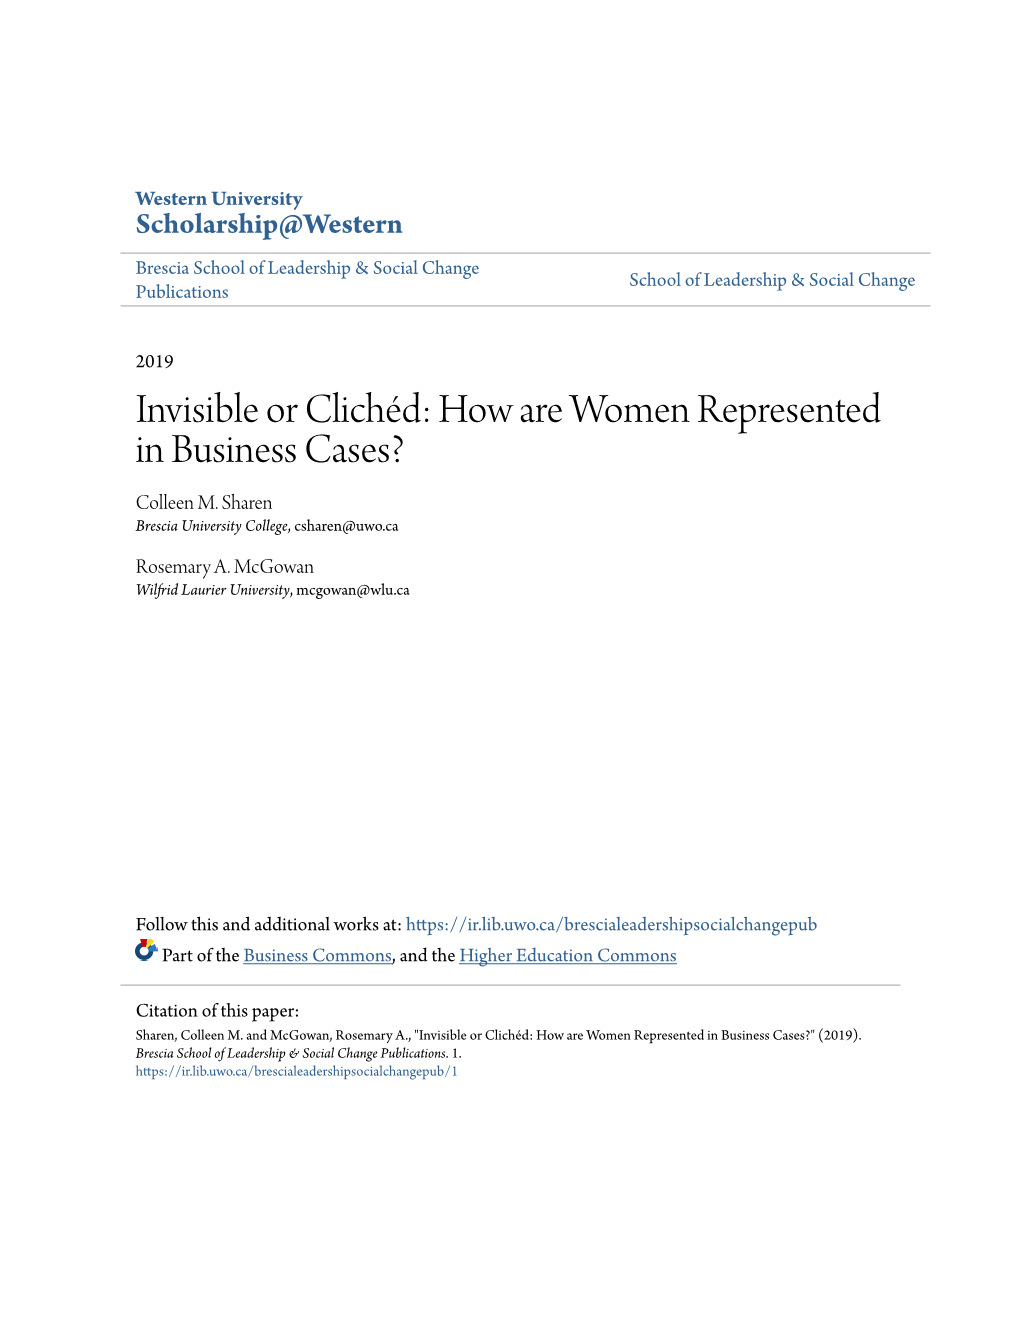 Invisible Or Clichéd: How Are Women Represented in Business Cases? Colleen M